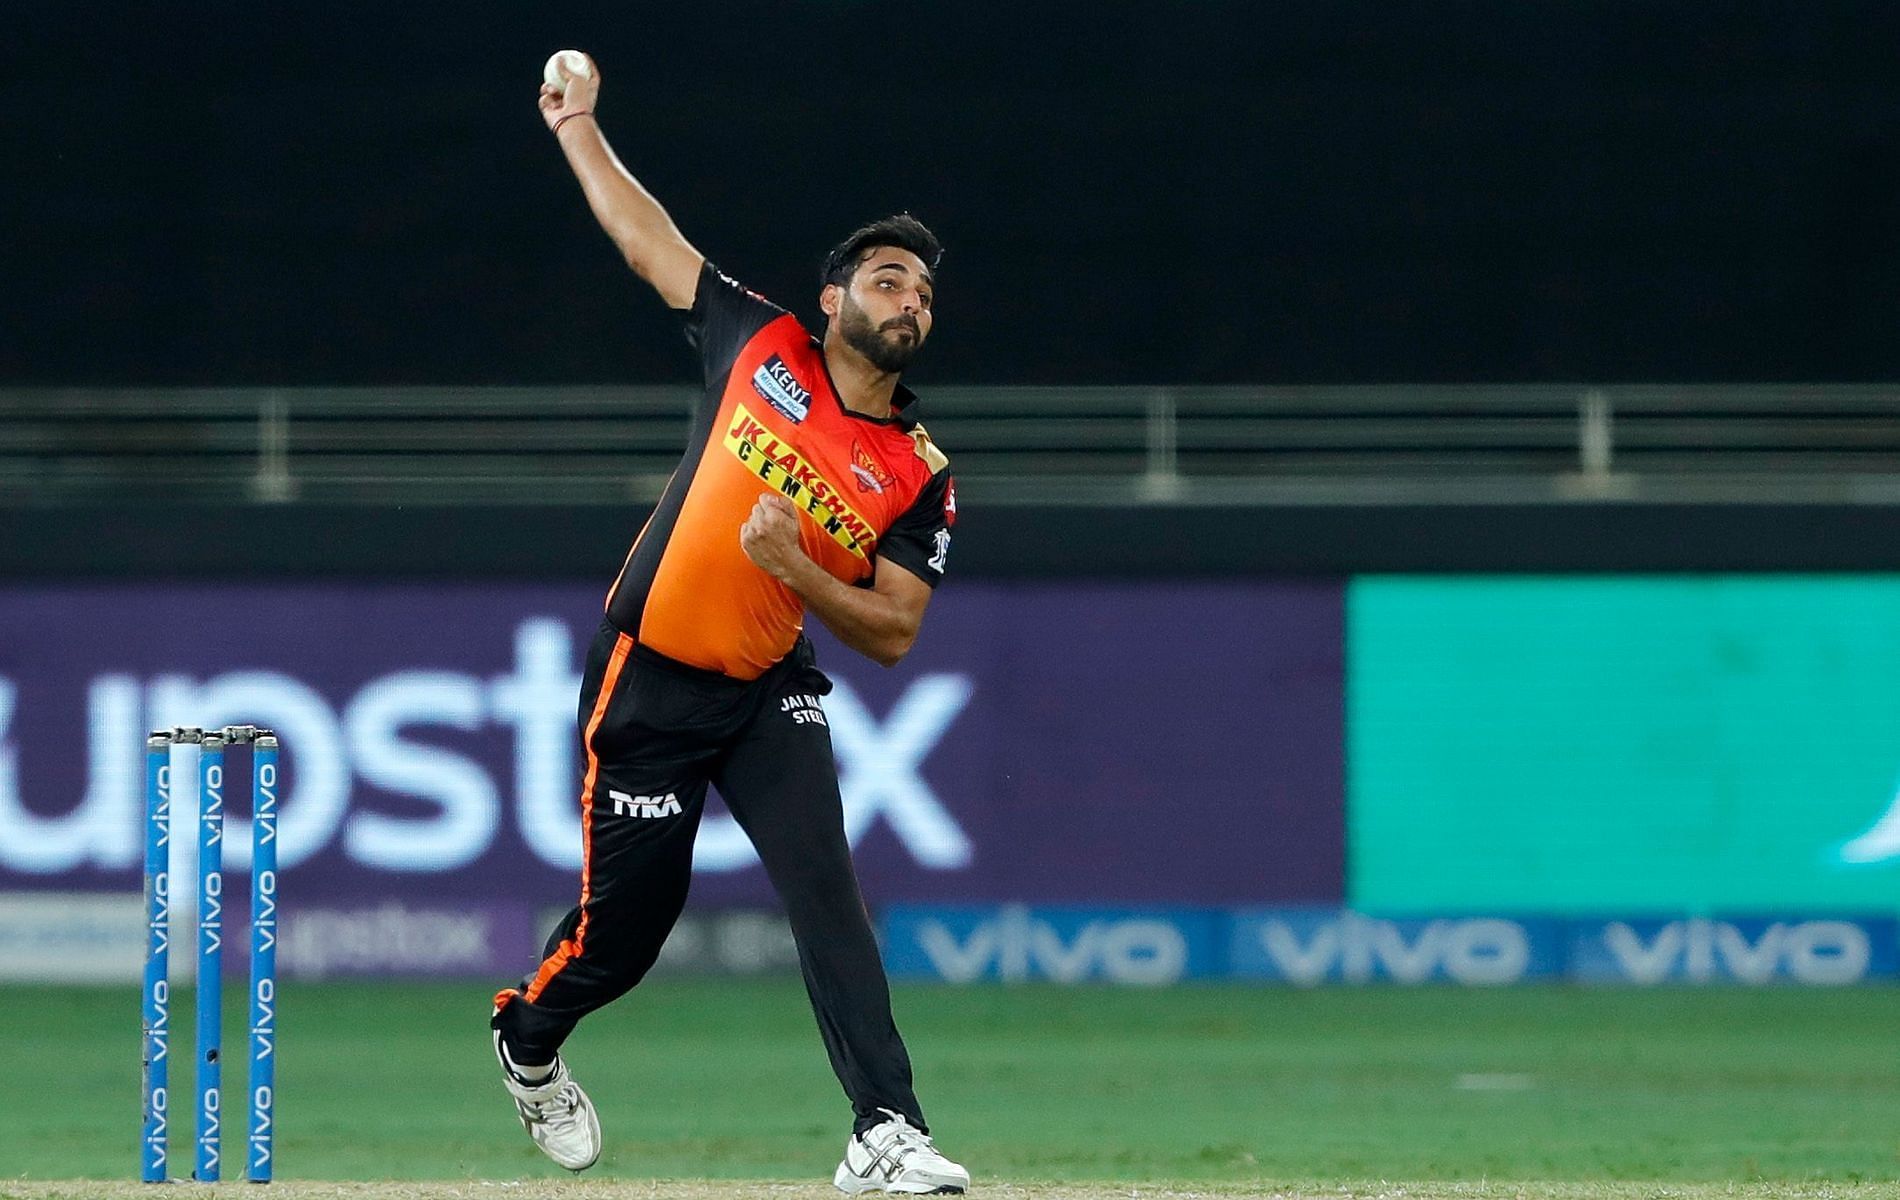 Bhuvneshwar Kumar can prove to be a good captaincy option for the Lucknow franchise if SRH release him.